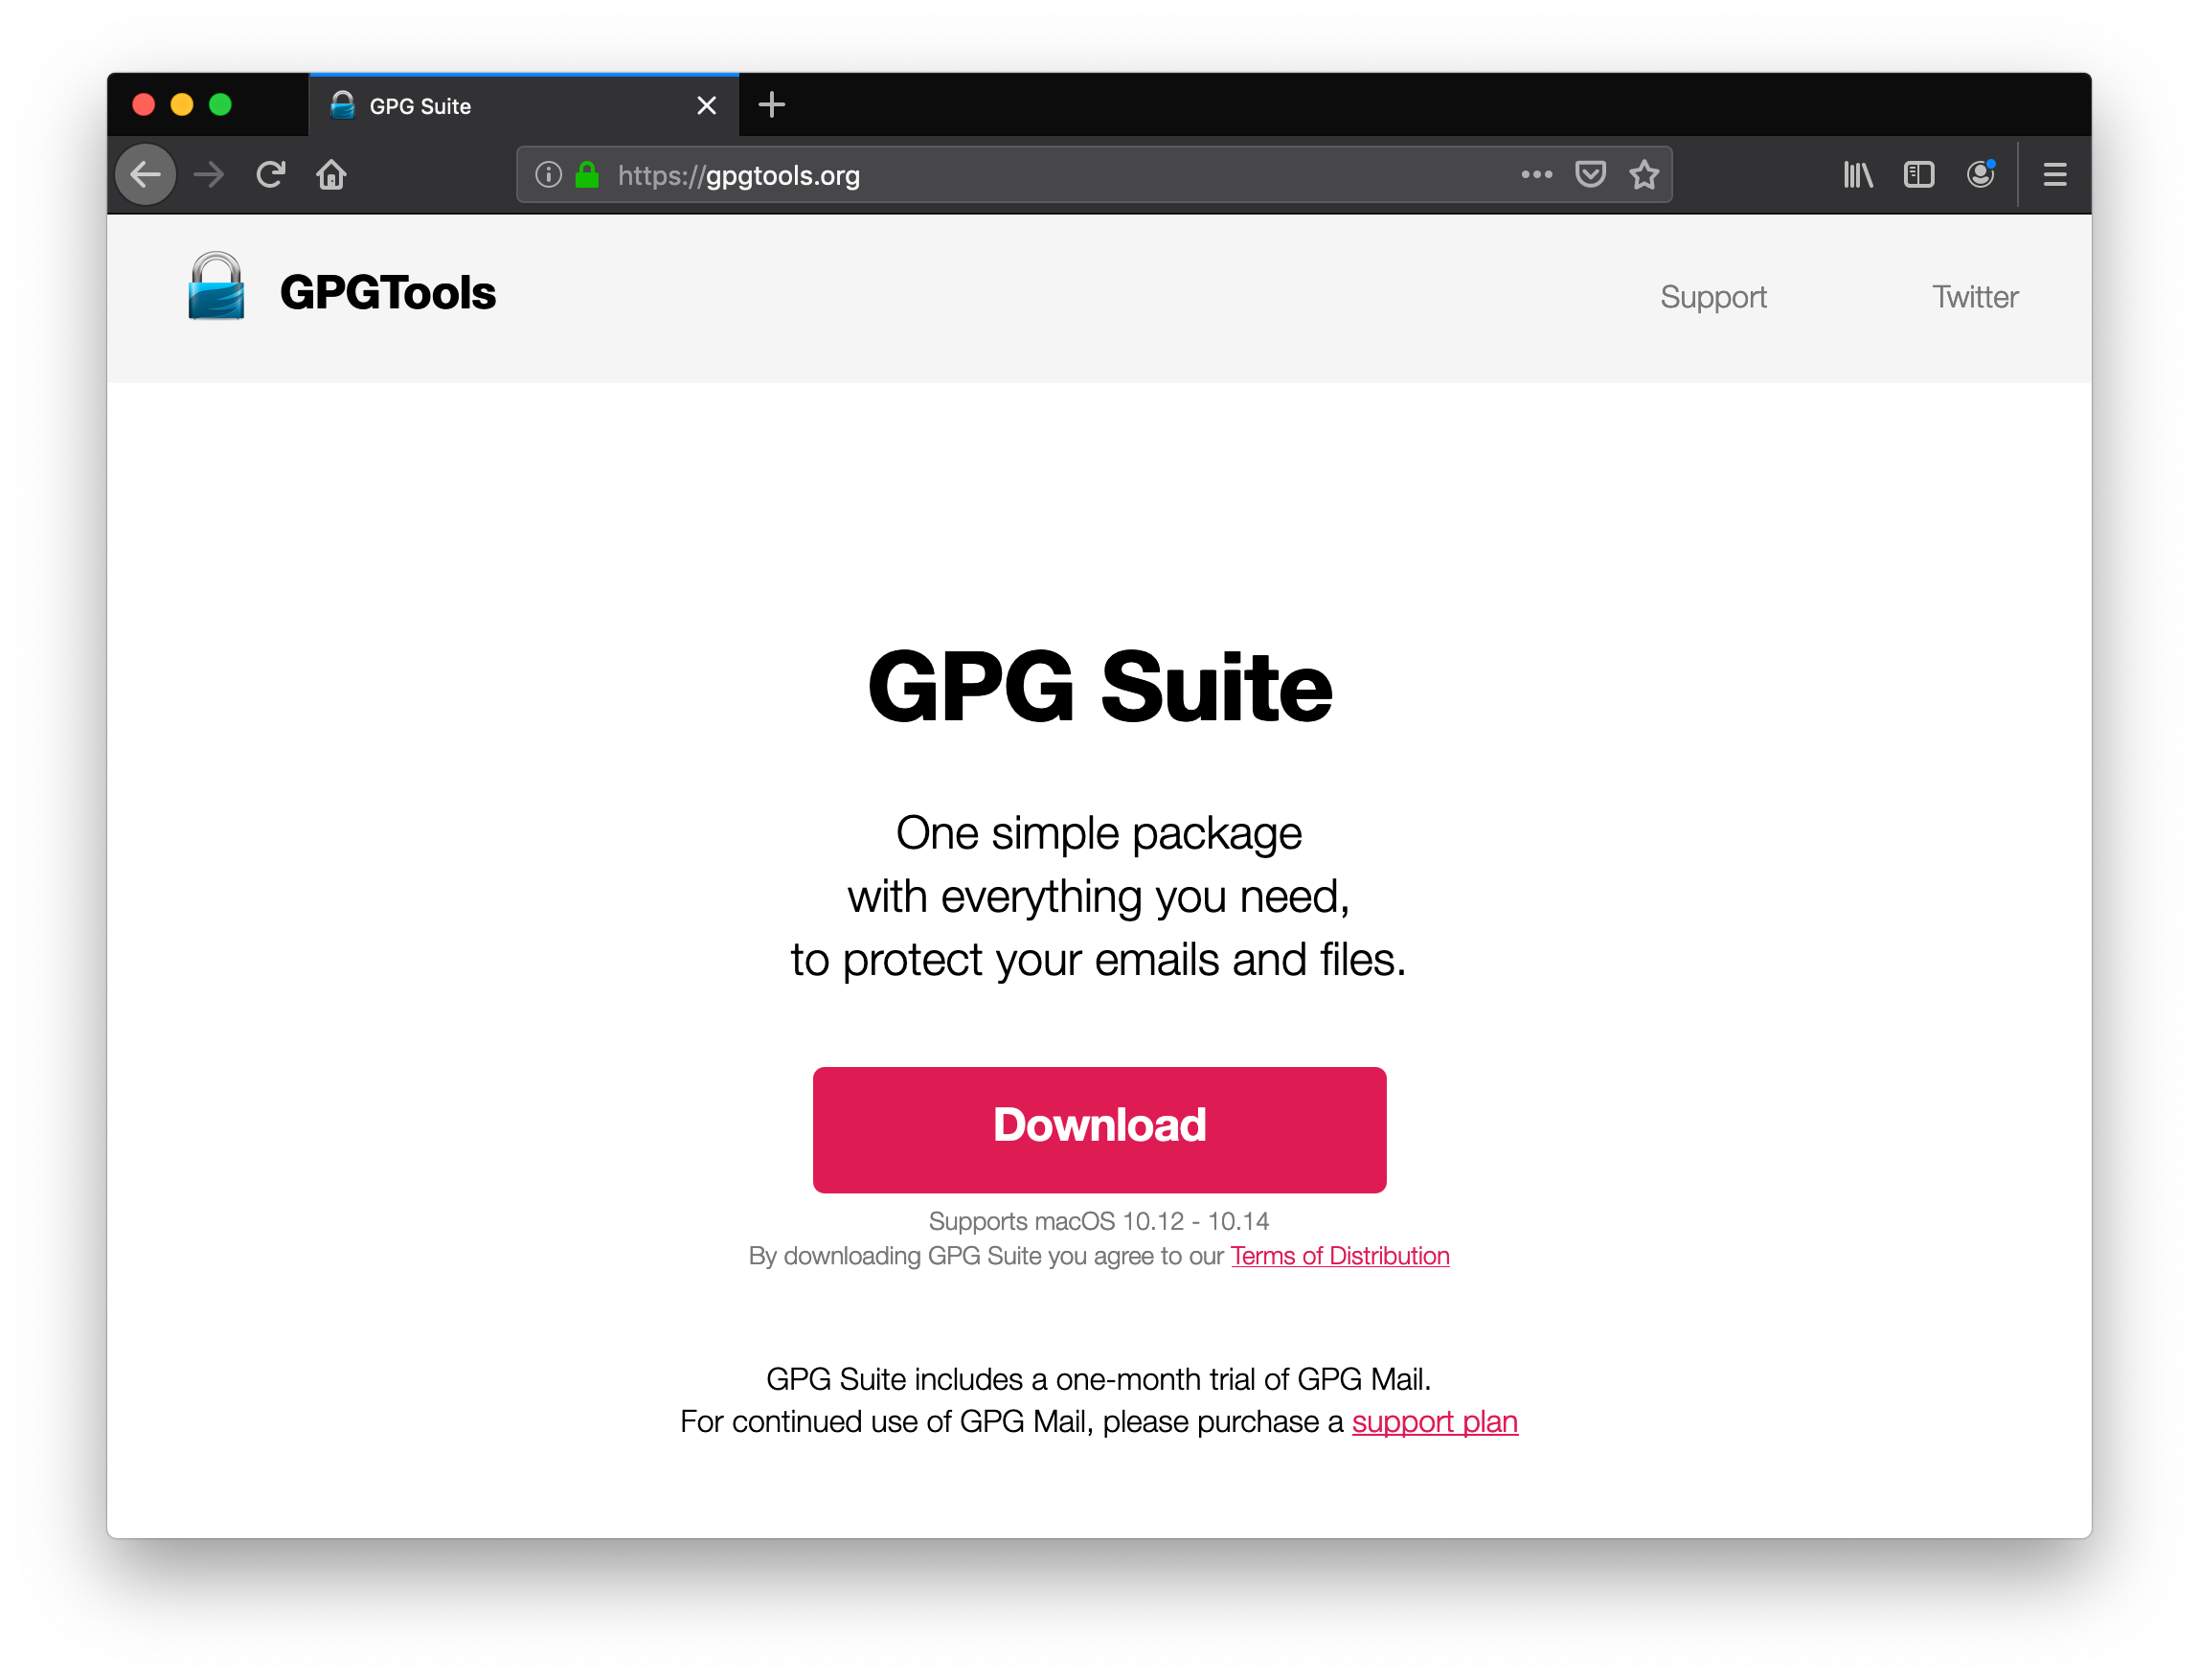 Landing page of GPG Suite